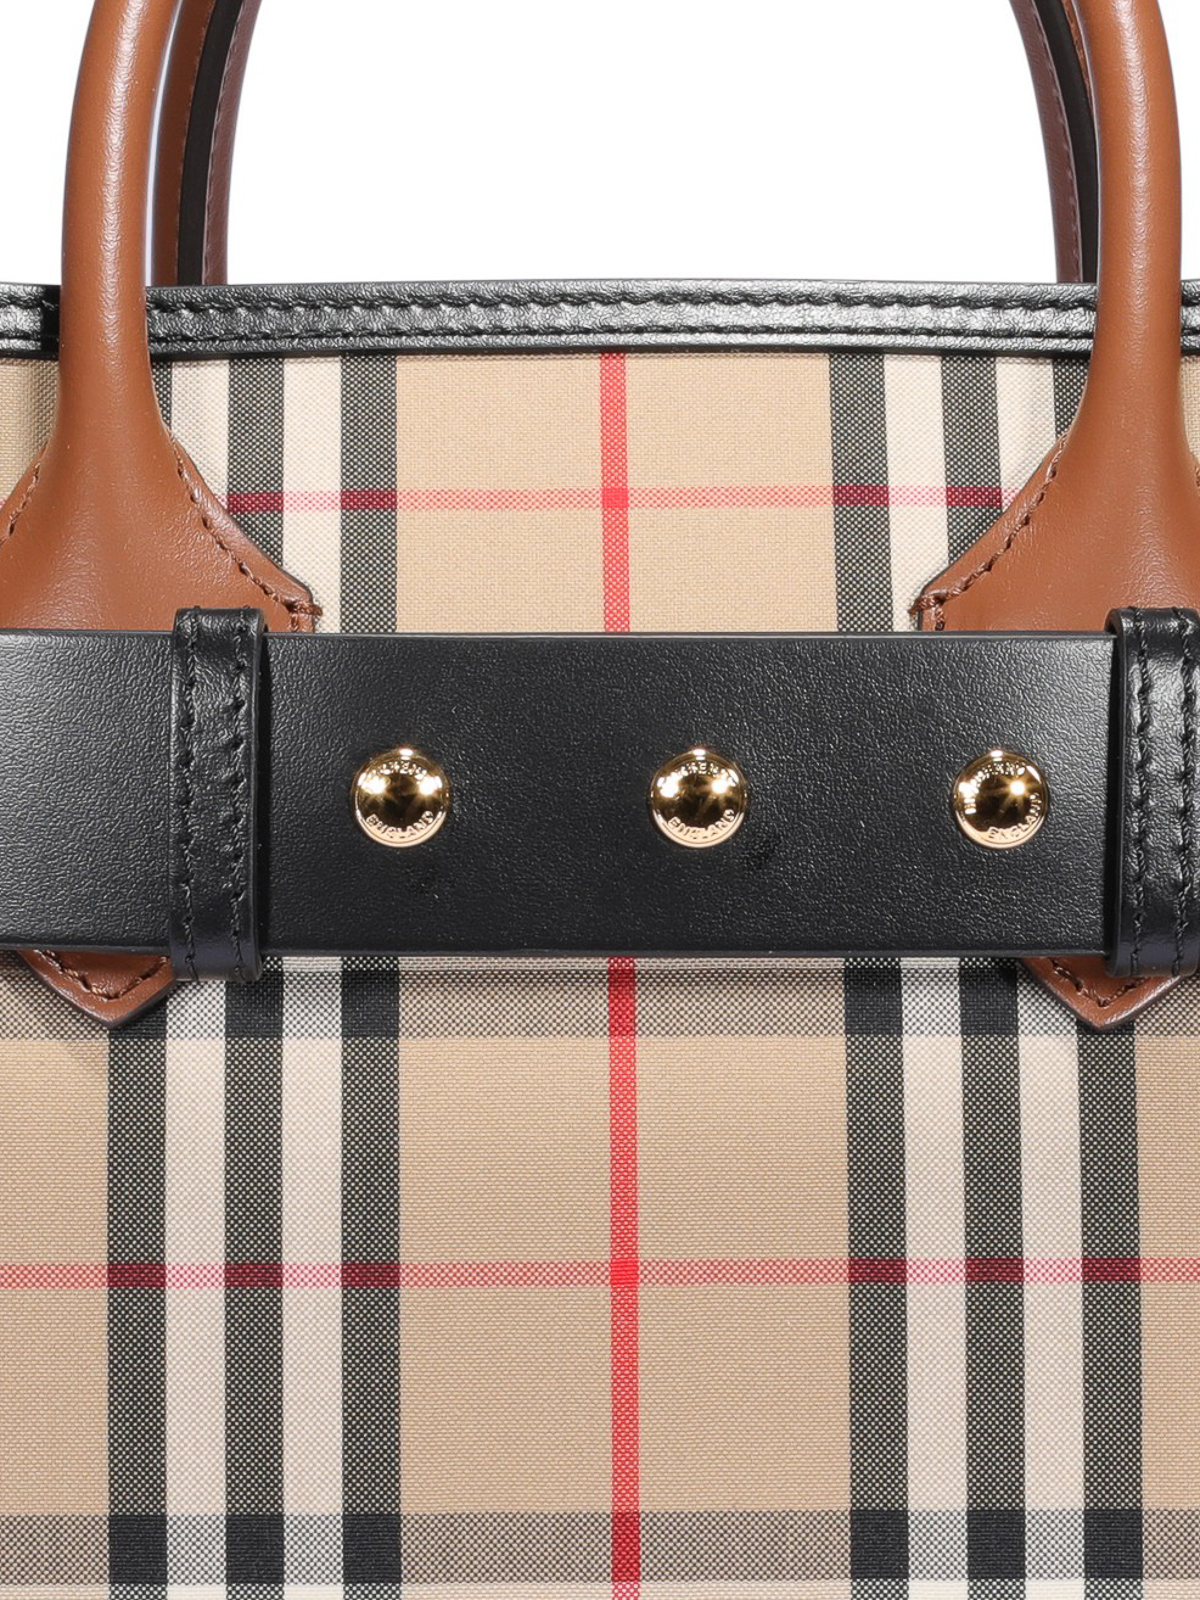 Totes bags Burberry - The Belt small Vintage check bag - 8018790